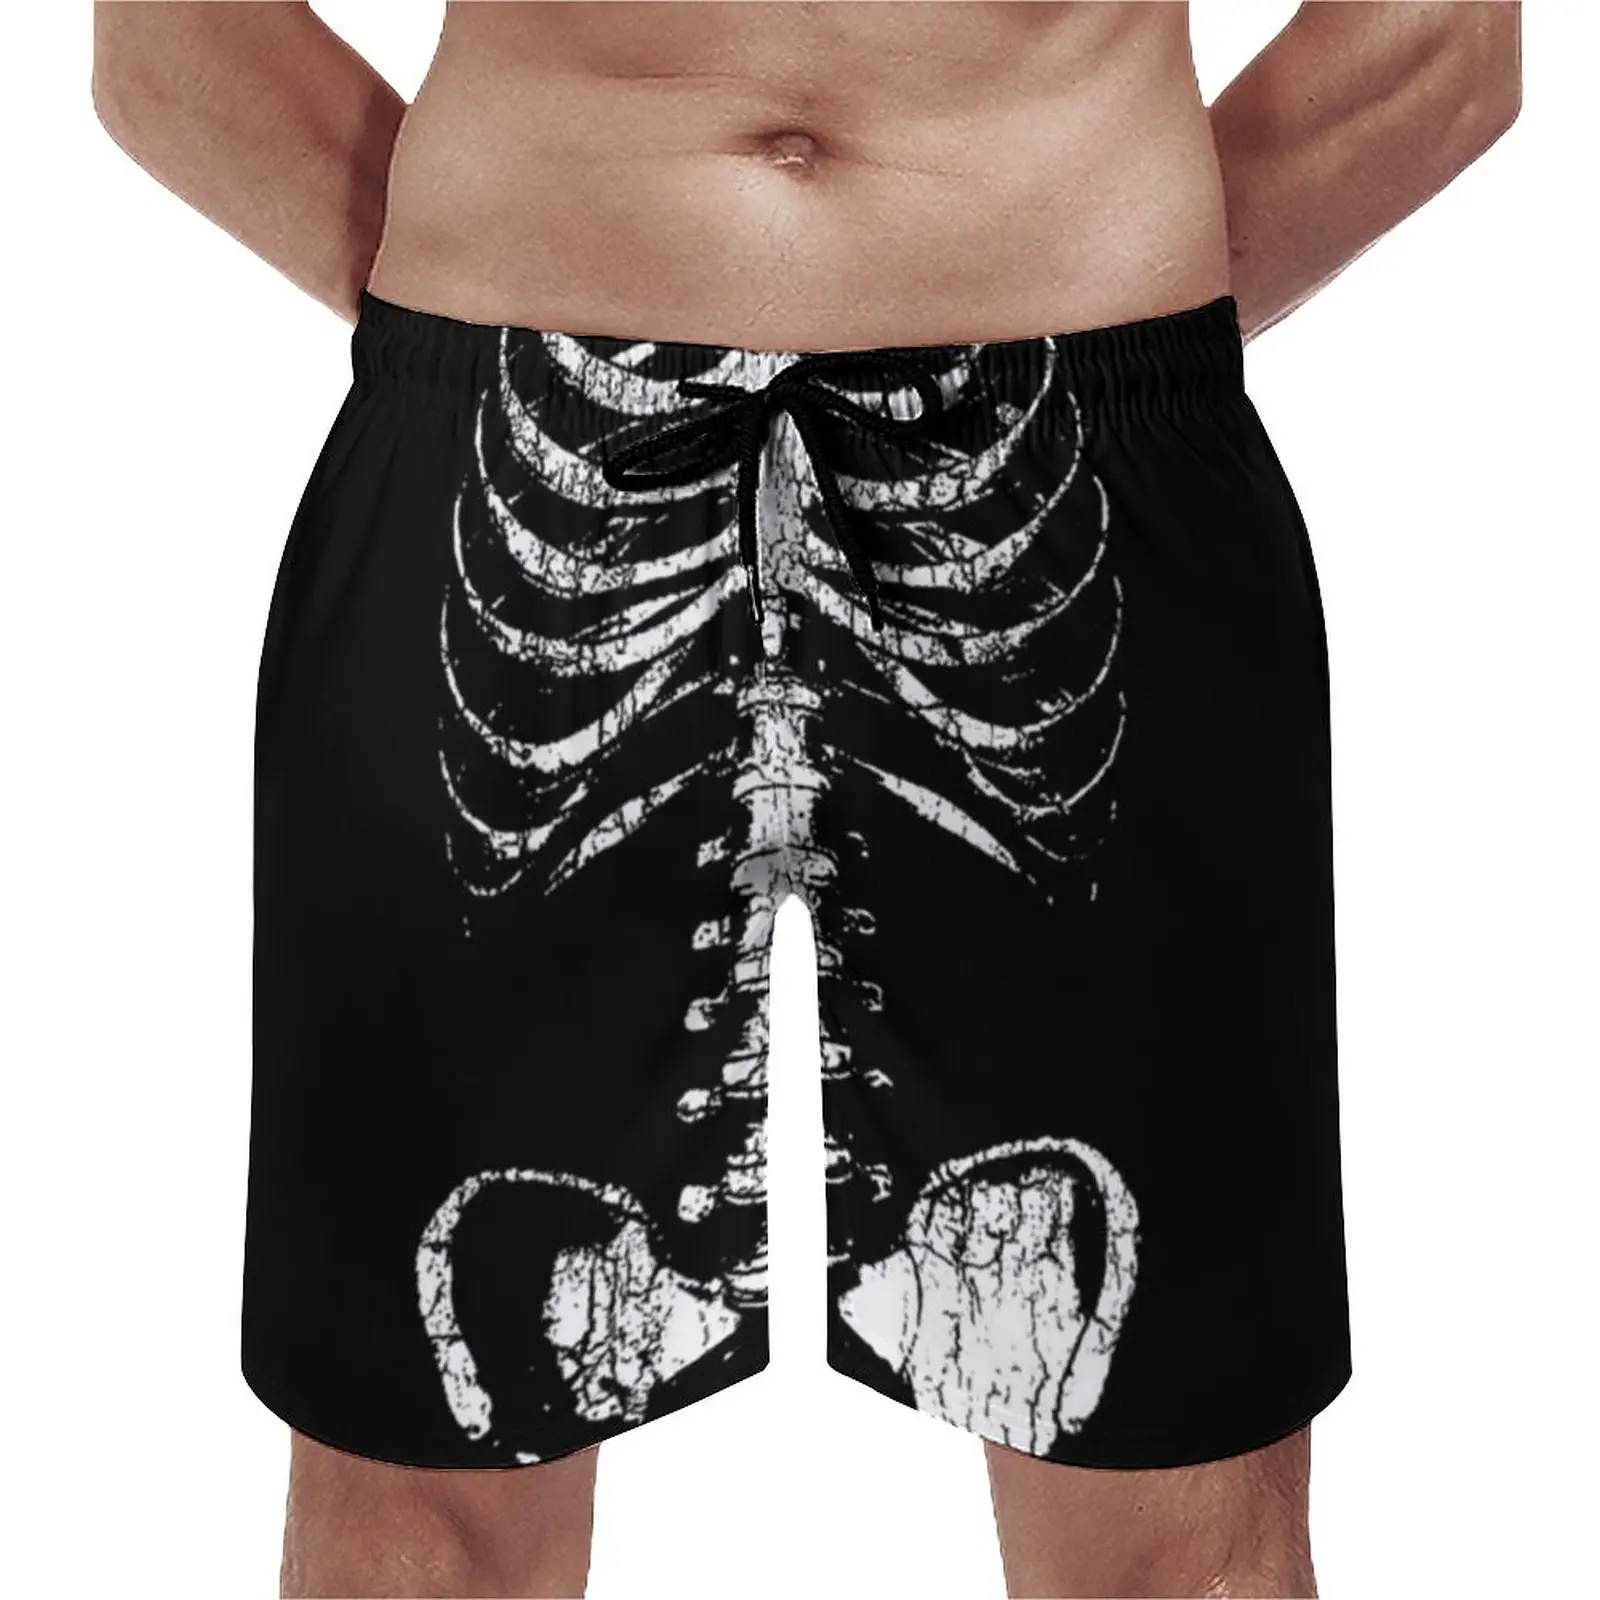 

Skeleton Board Shorts Summer Spare Ribs Trendy Wearable Art Cute Board Short Pants Males Sports Fast Dry Printed Swimming Trunks